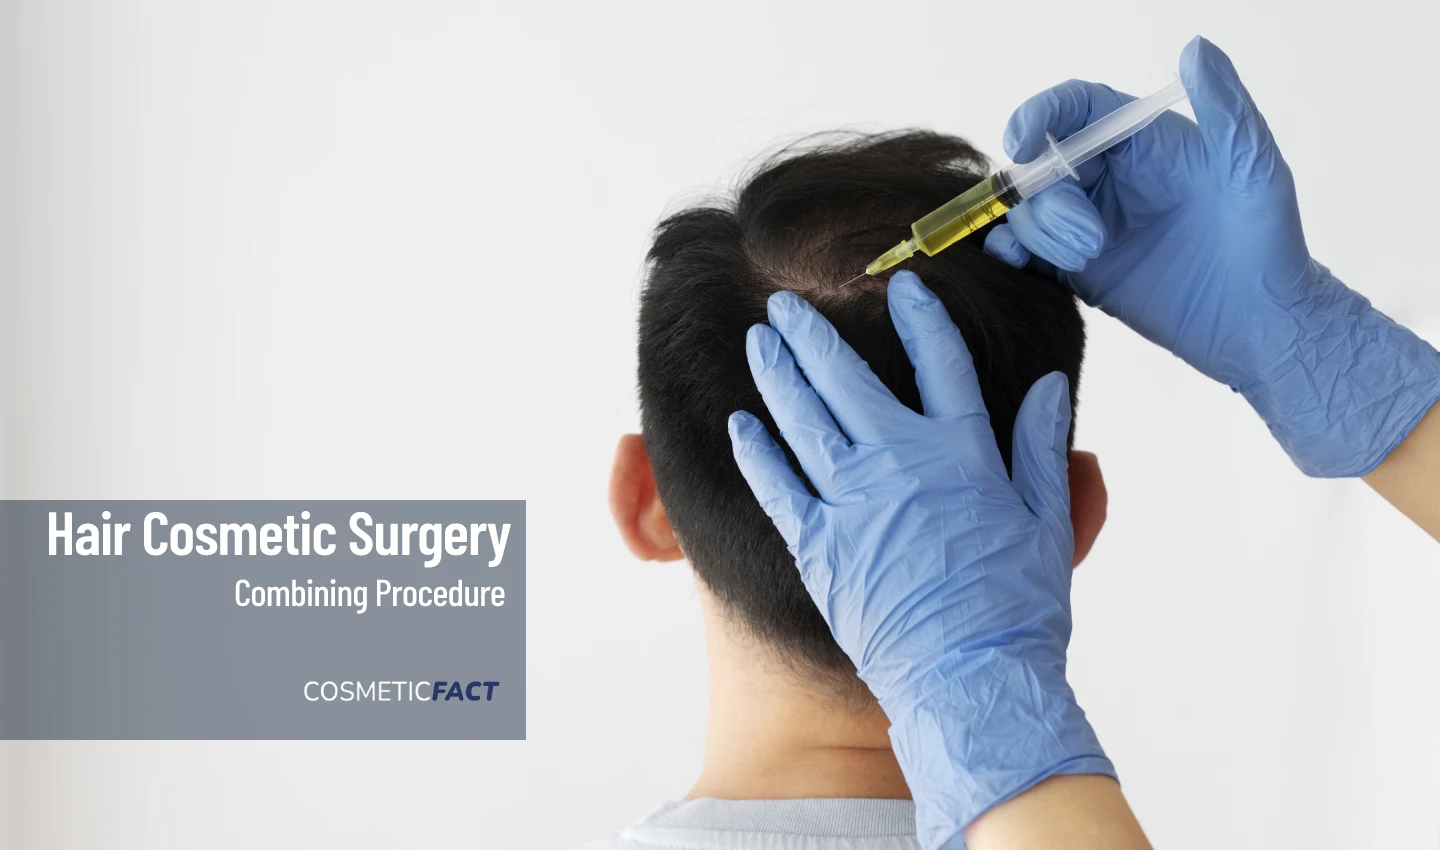 An image of a woman with a medical professional injecting PRP therapy into her scalp as part of a hair transplant procedure.